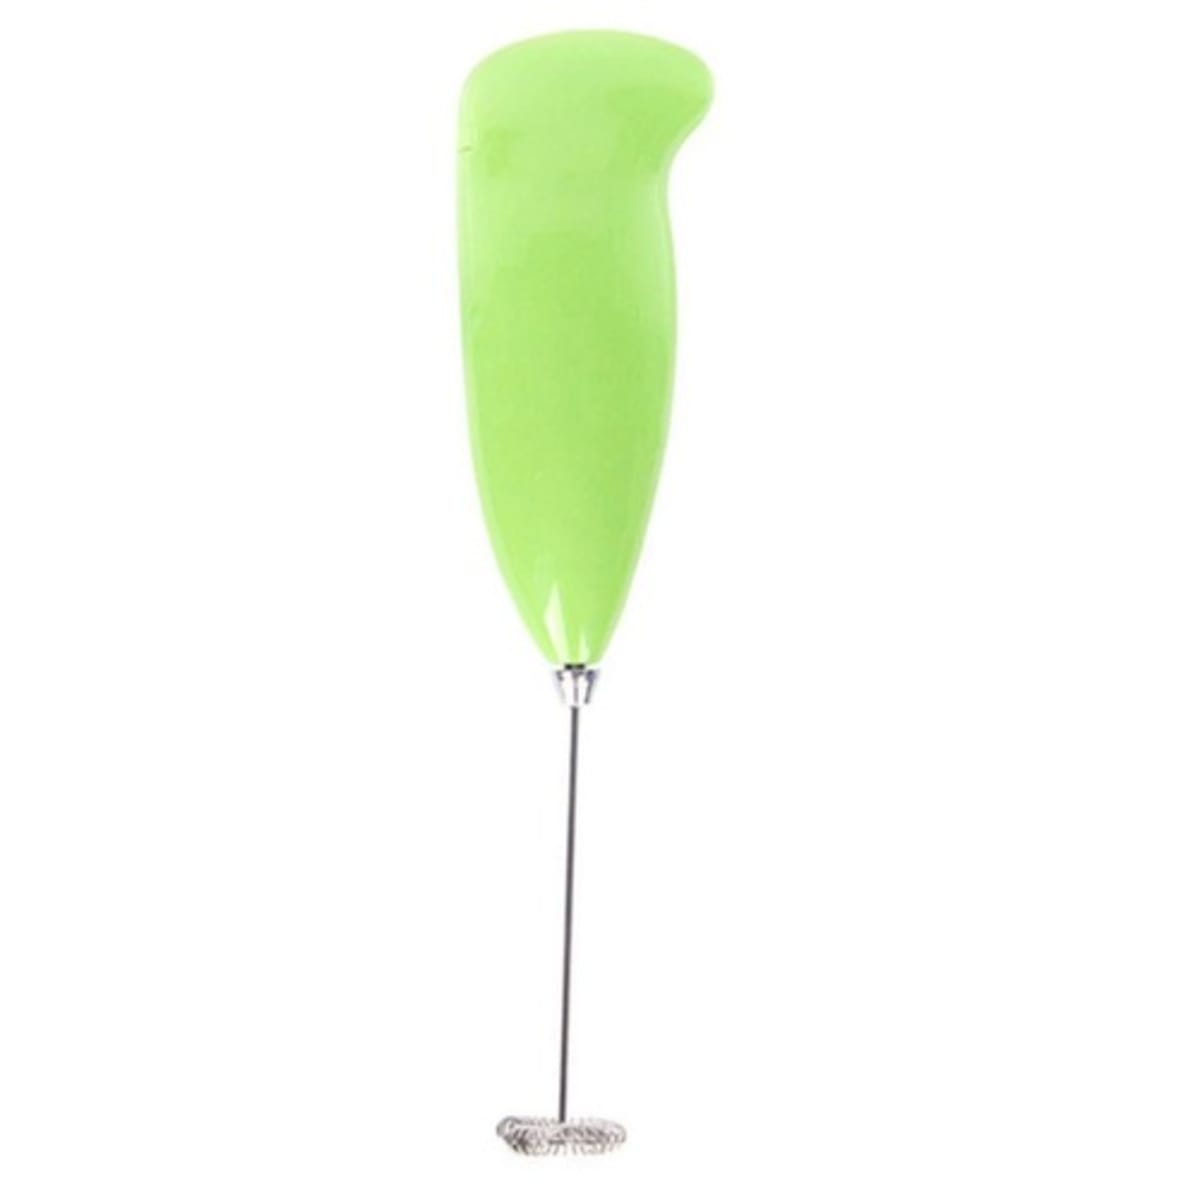 2PCS Milk Frother Handheld Battery Operated - Electric Whisk